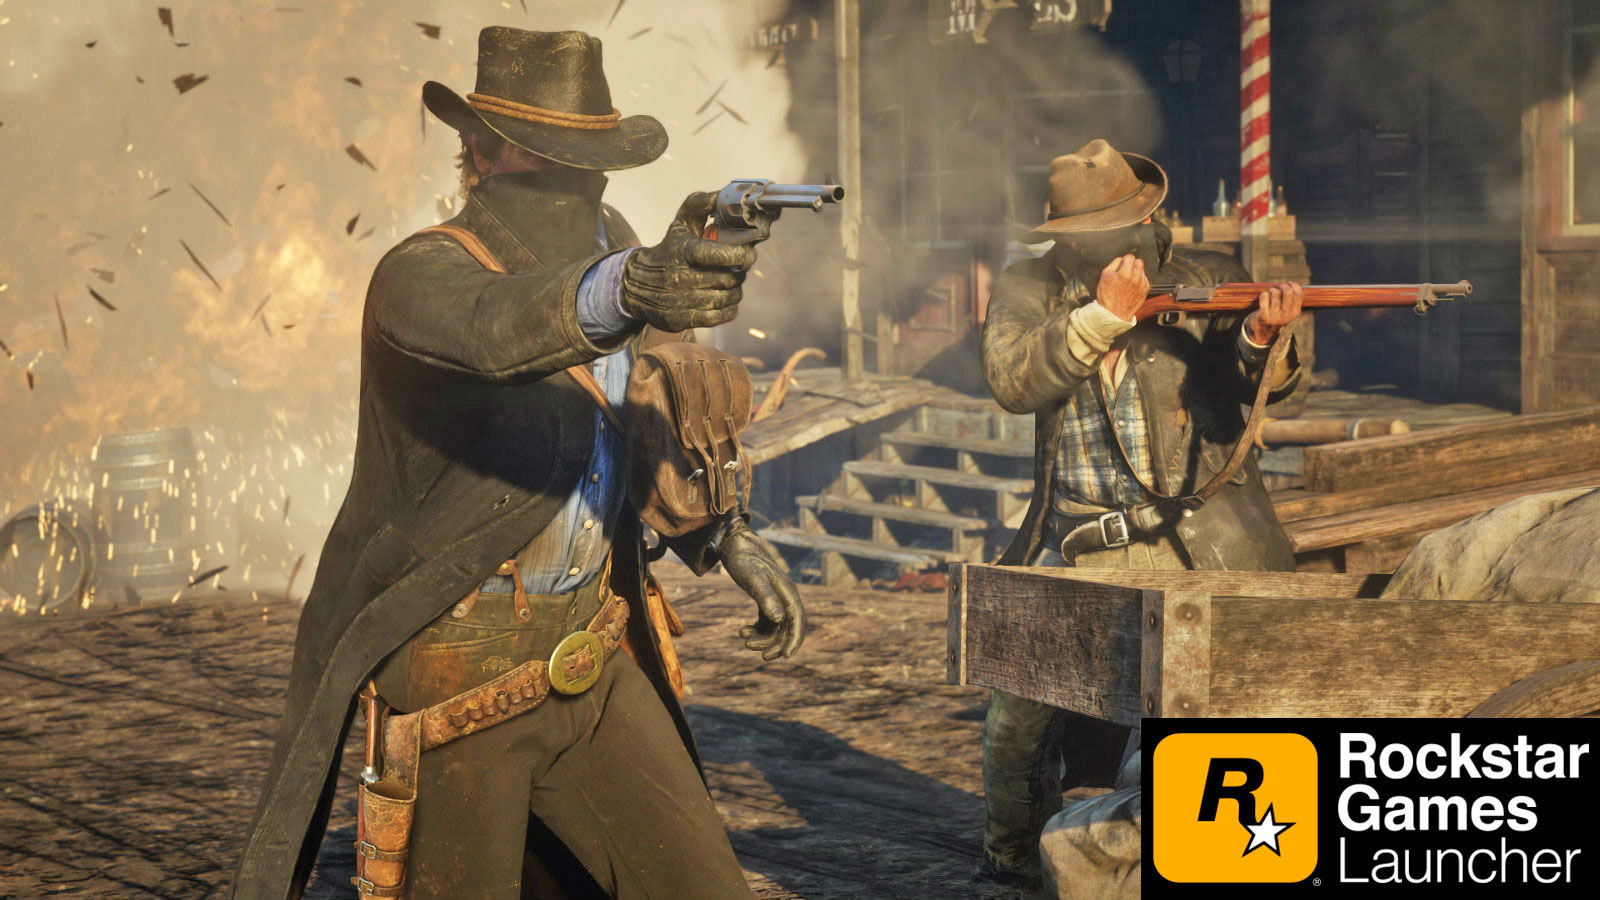 When is Red Dead Redemption 2 coming to Steam?